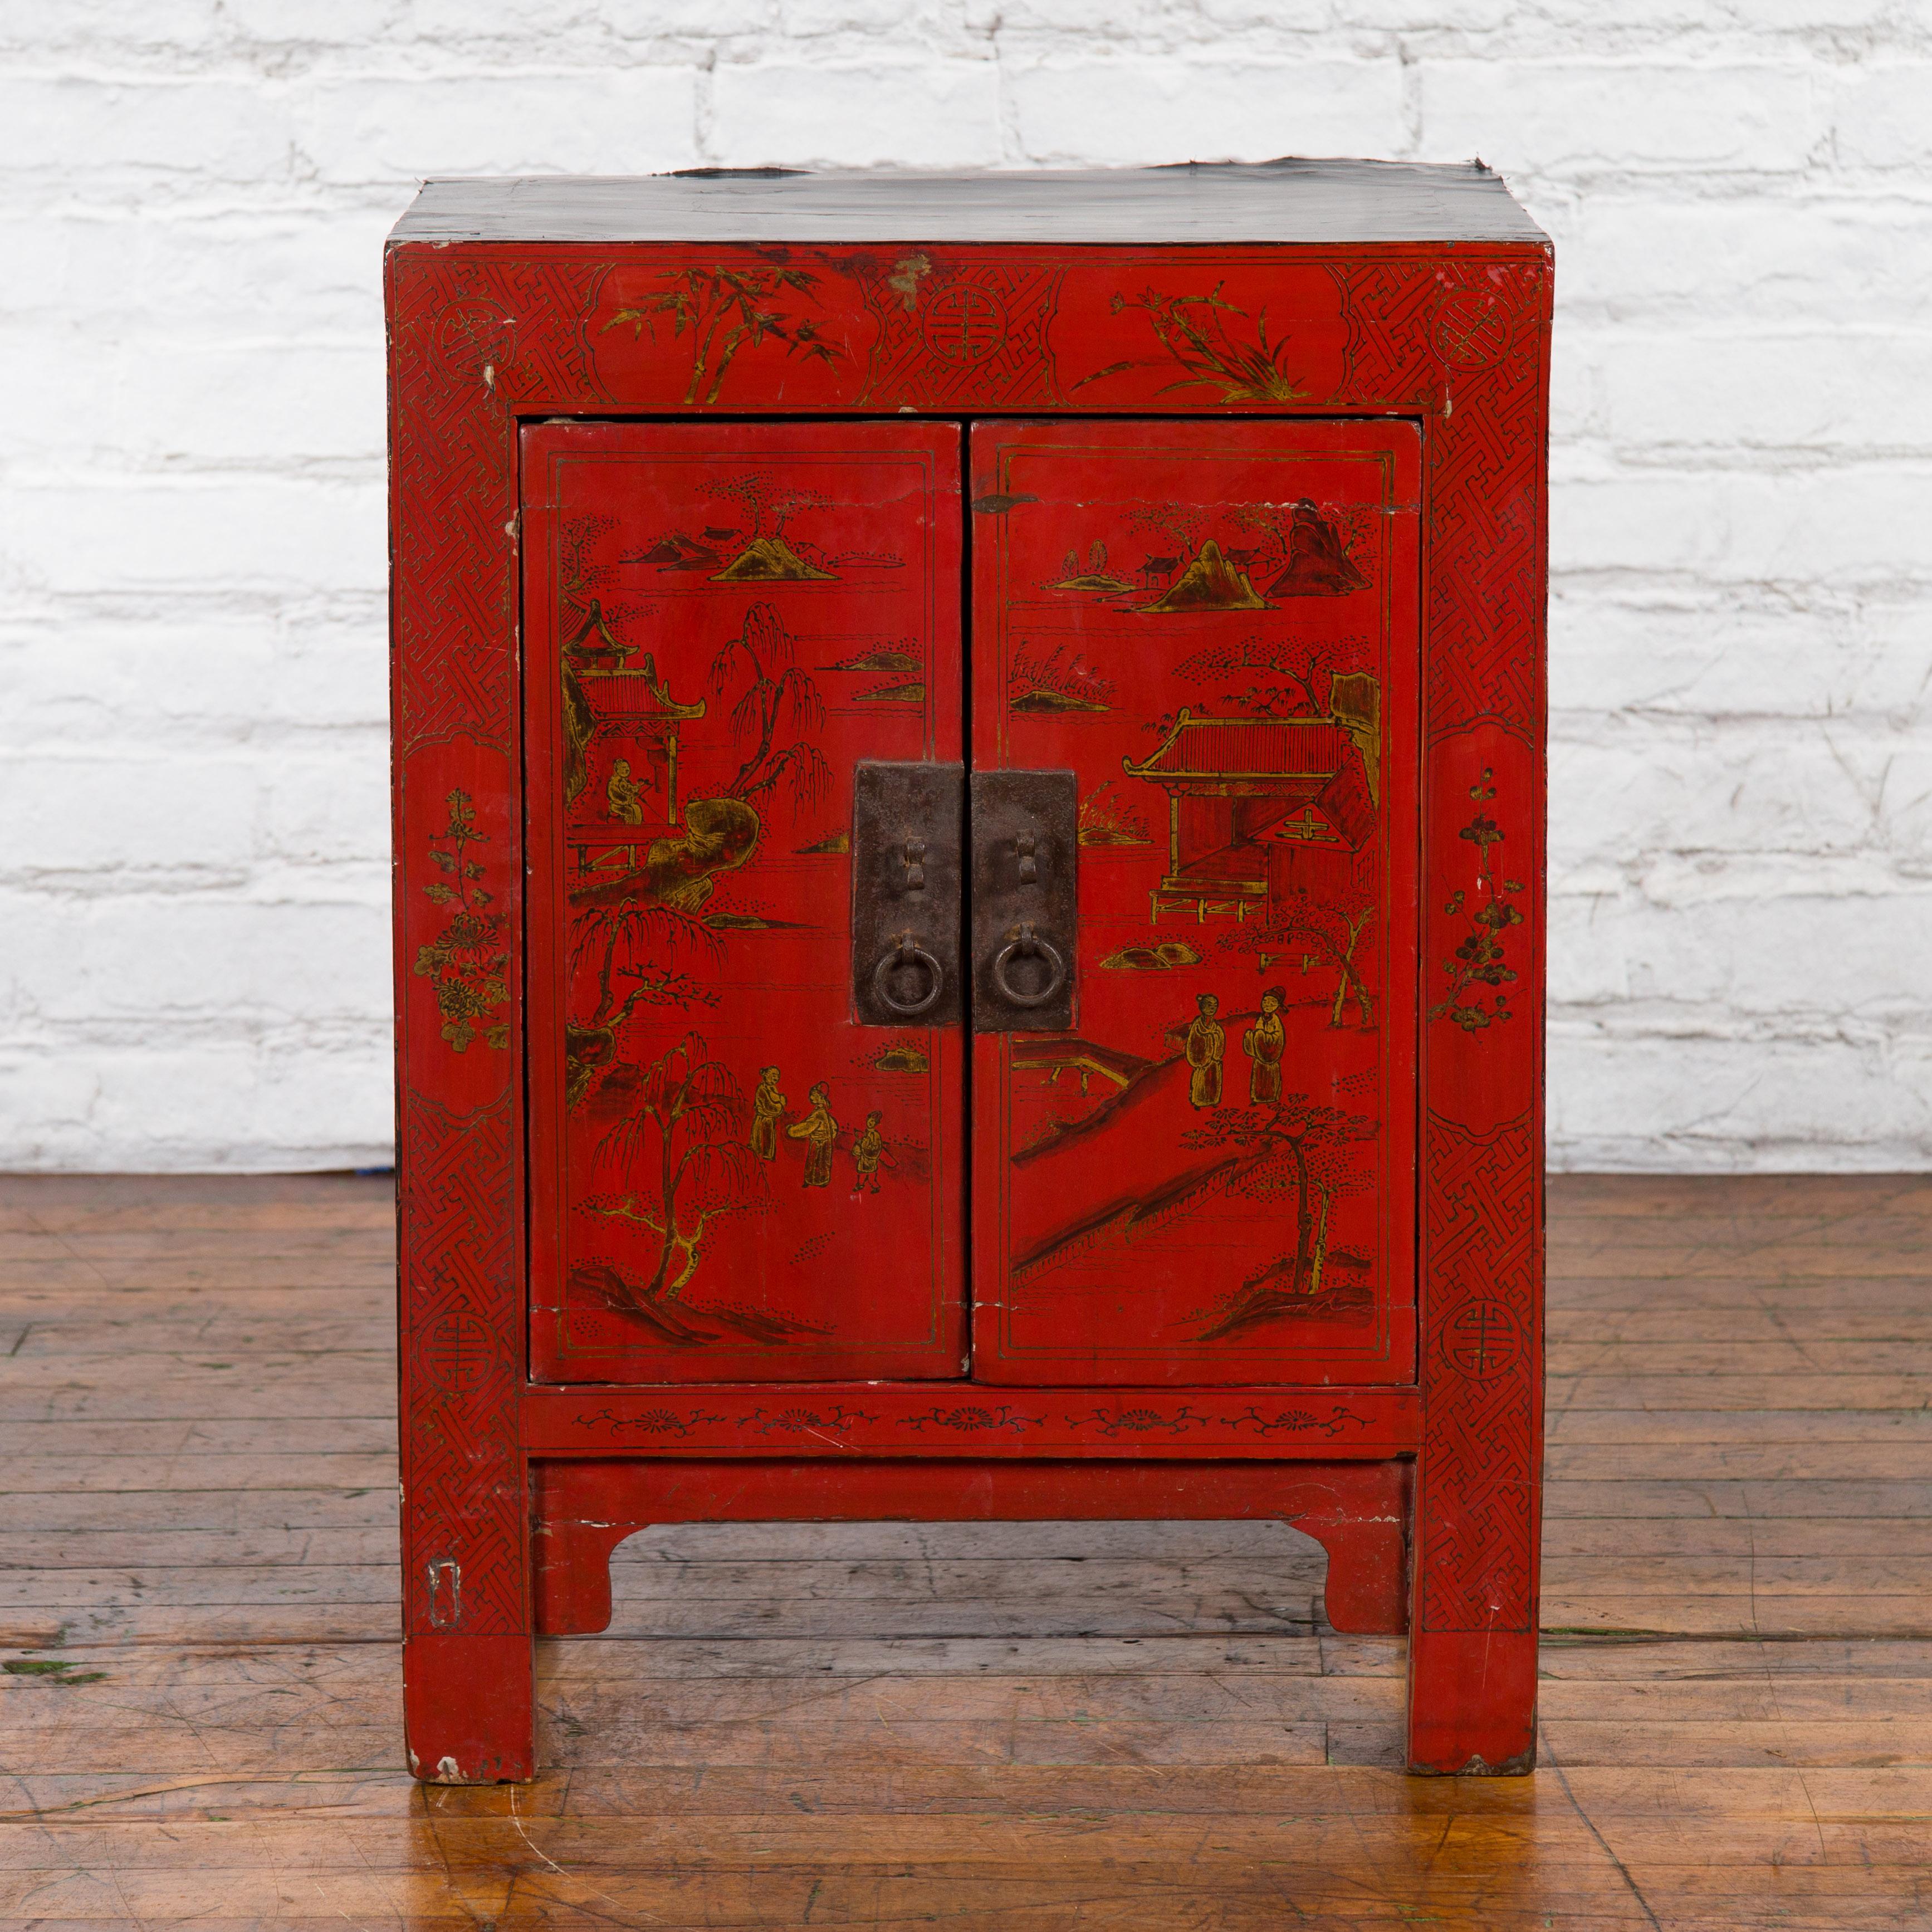 A Chinese Qing Dynasty period red lacquer side cabinet from the 19th century, with golden Chinoiserie décor. Created in China during the Qing Dynasty, this side cabinet features a red lacquered façade perfectly accented by a delicate golden